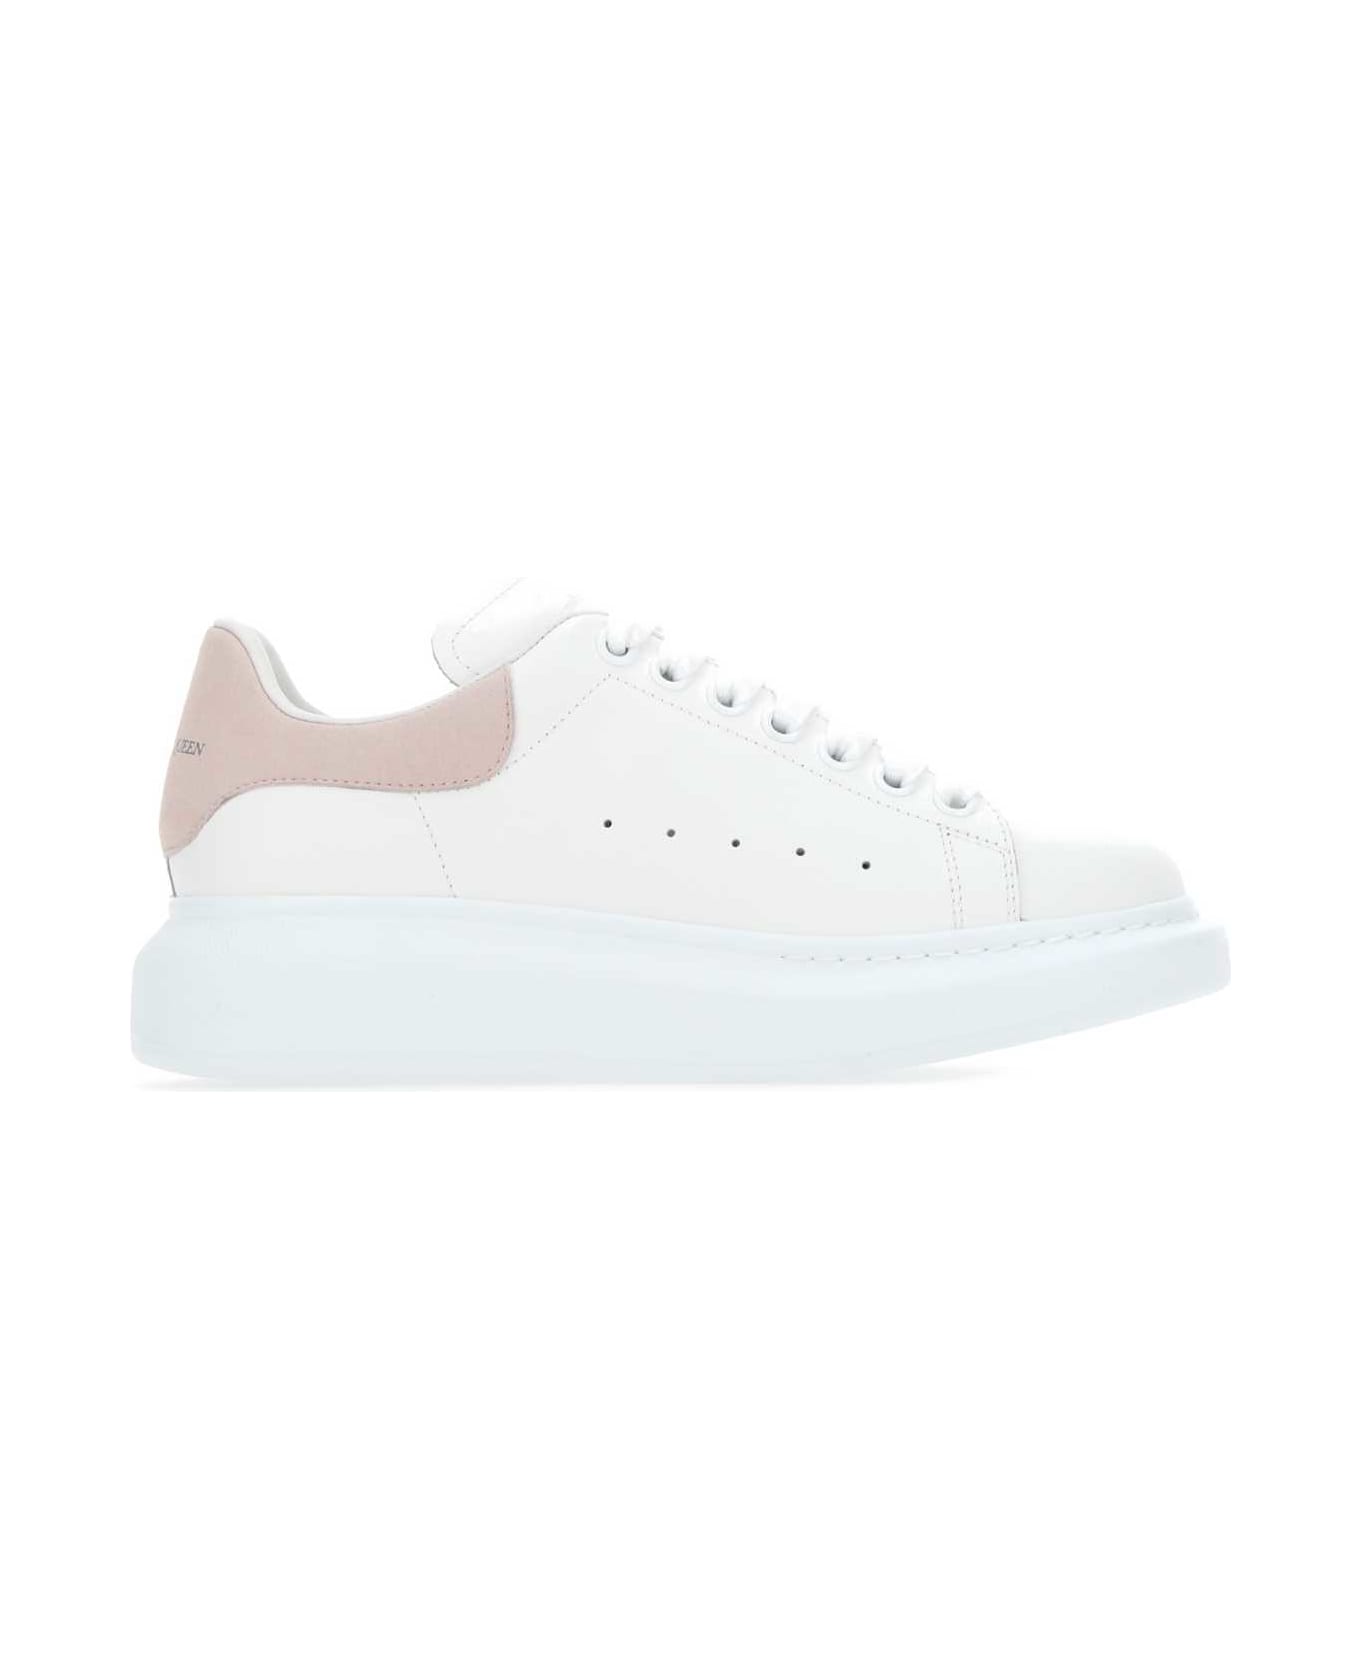 Alexander McQueen White Leather Sneakers With Powder Pink Suede Heel - 9182